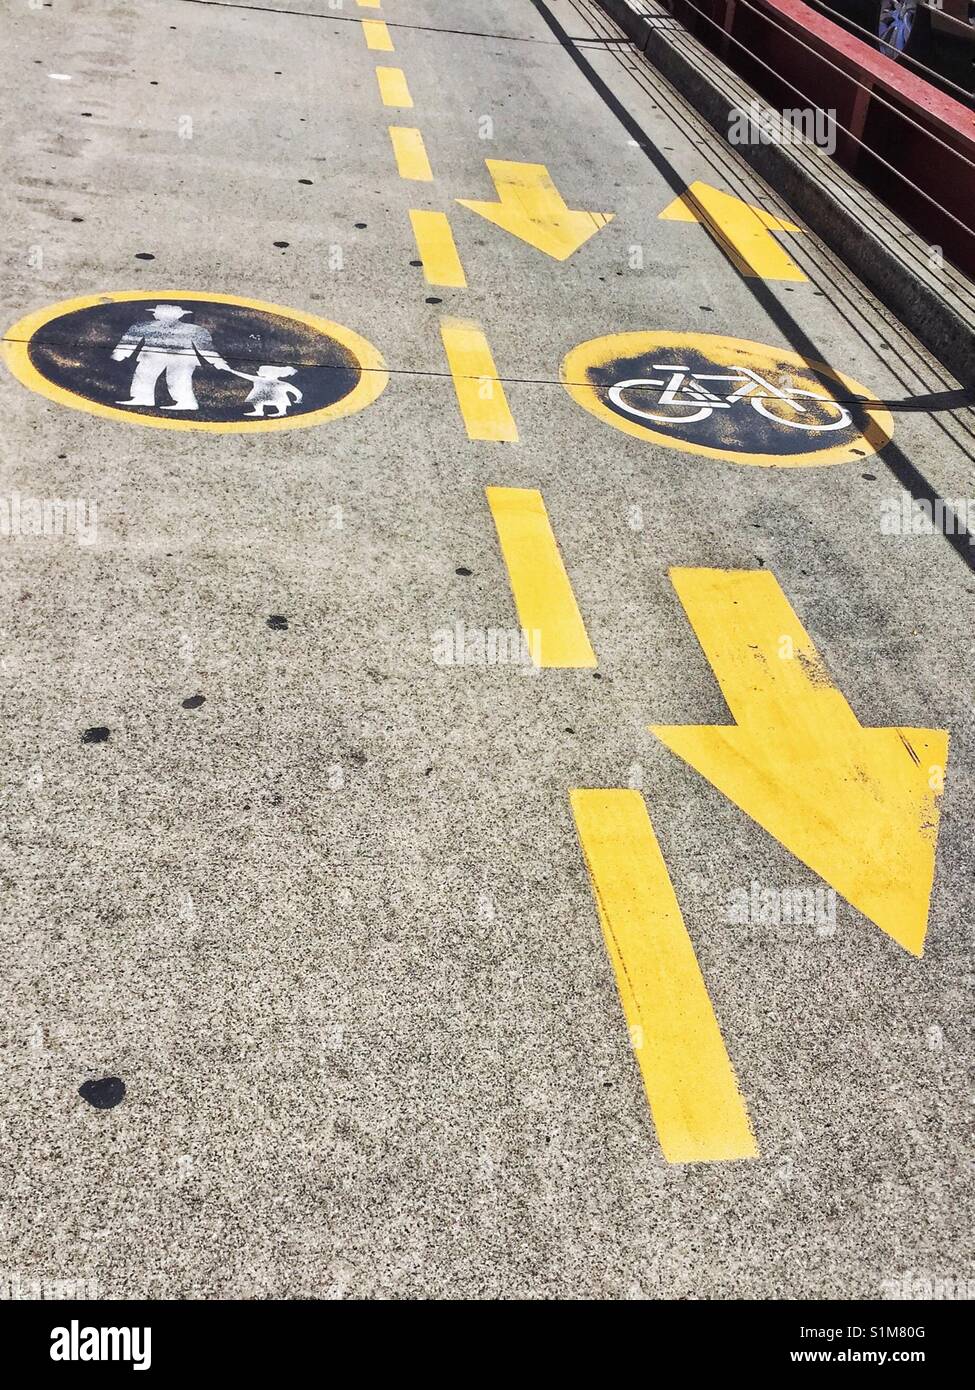 Shared pathway for bicycles and pedestrians notices painted on concrete with symbols, directional arrows and lane lines marking. Safety signage on concrete Stock Photo